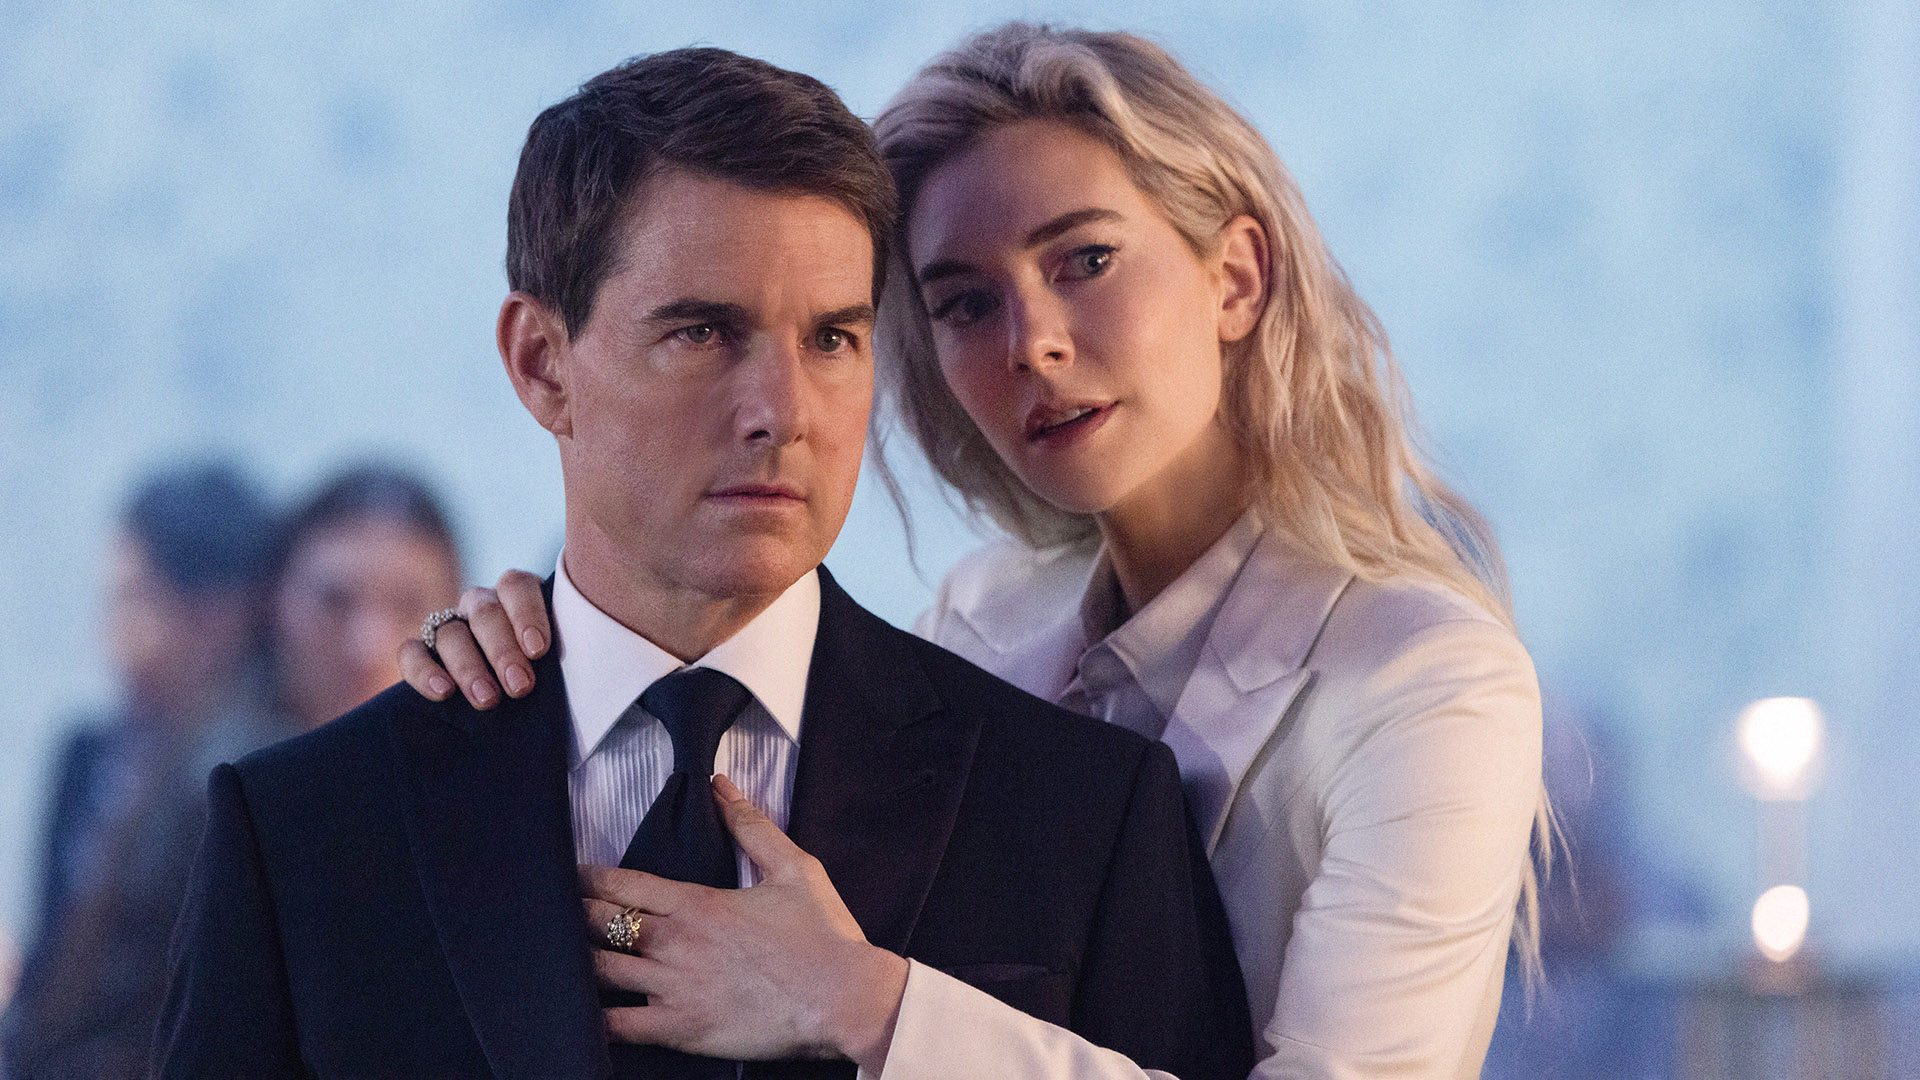 Mission Impossible 7 is Now Officially a Flop, Looks To Lose $100 Million